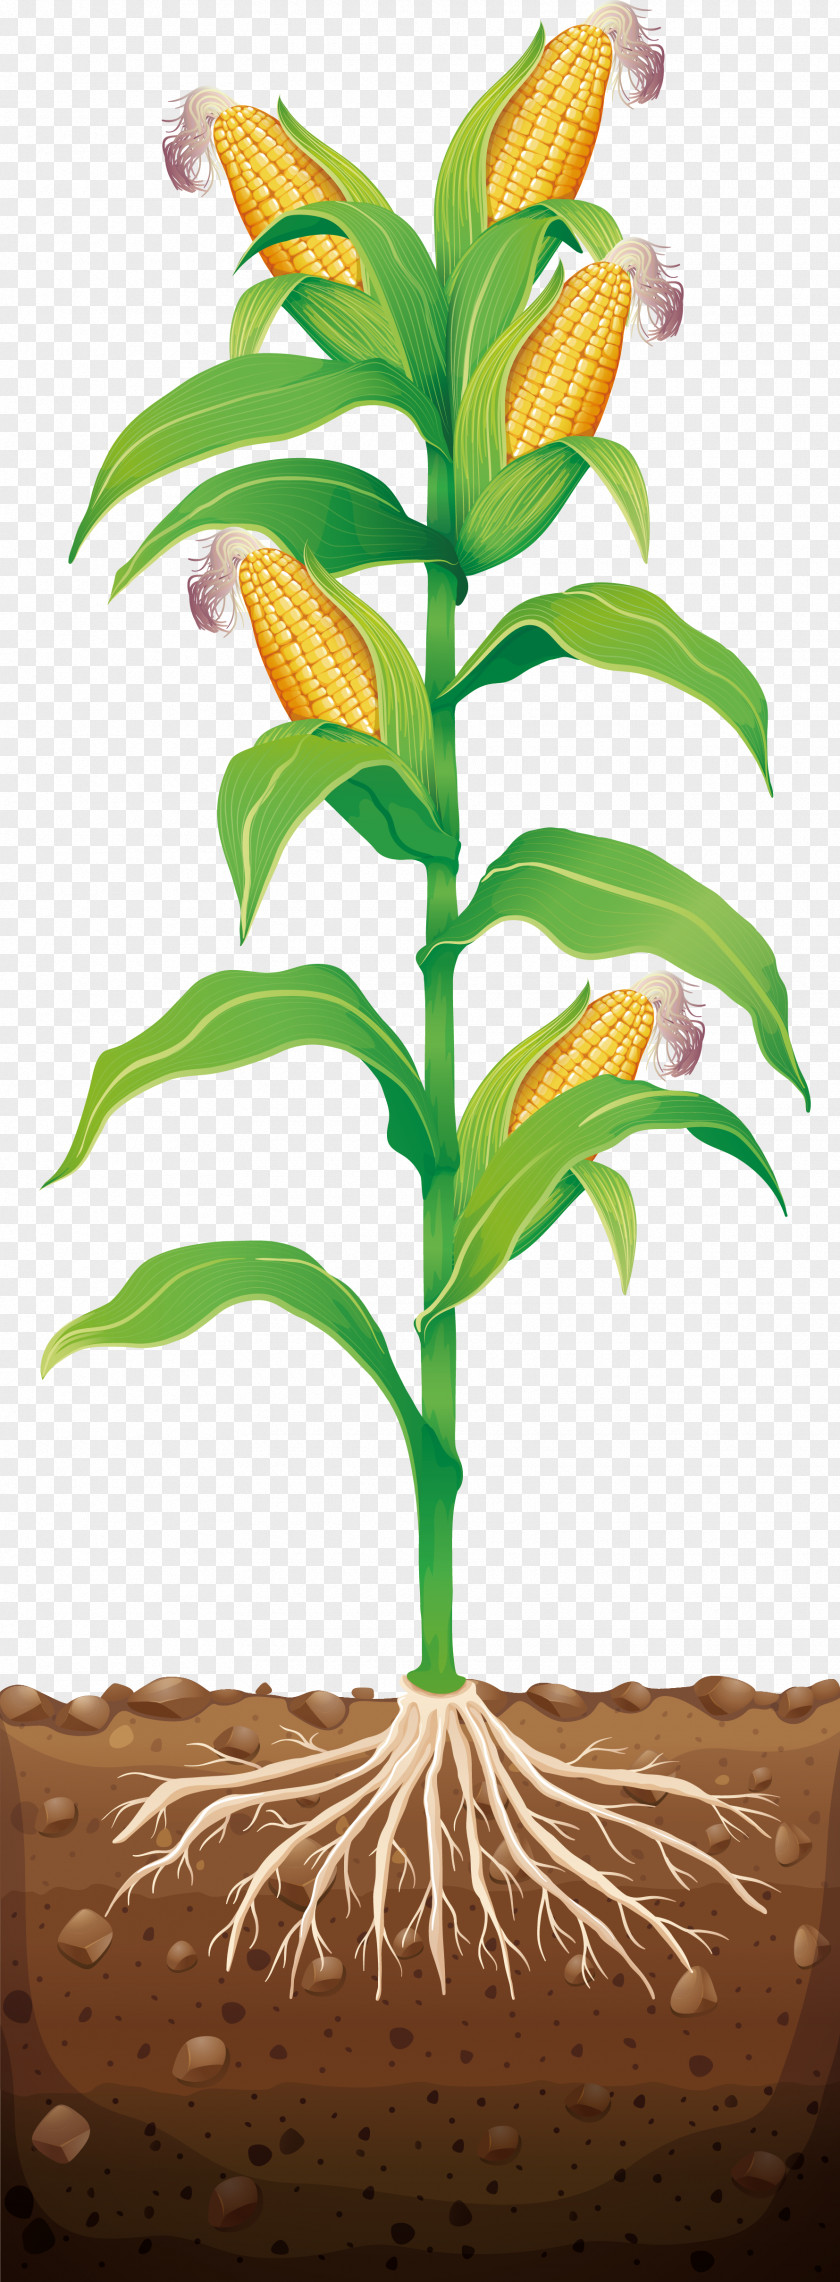 Sweet Corn On The Cob Maize Illustration PNG